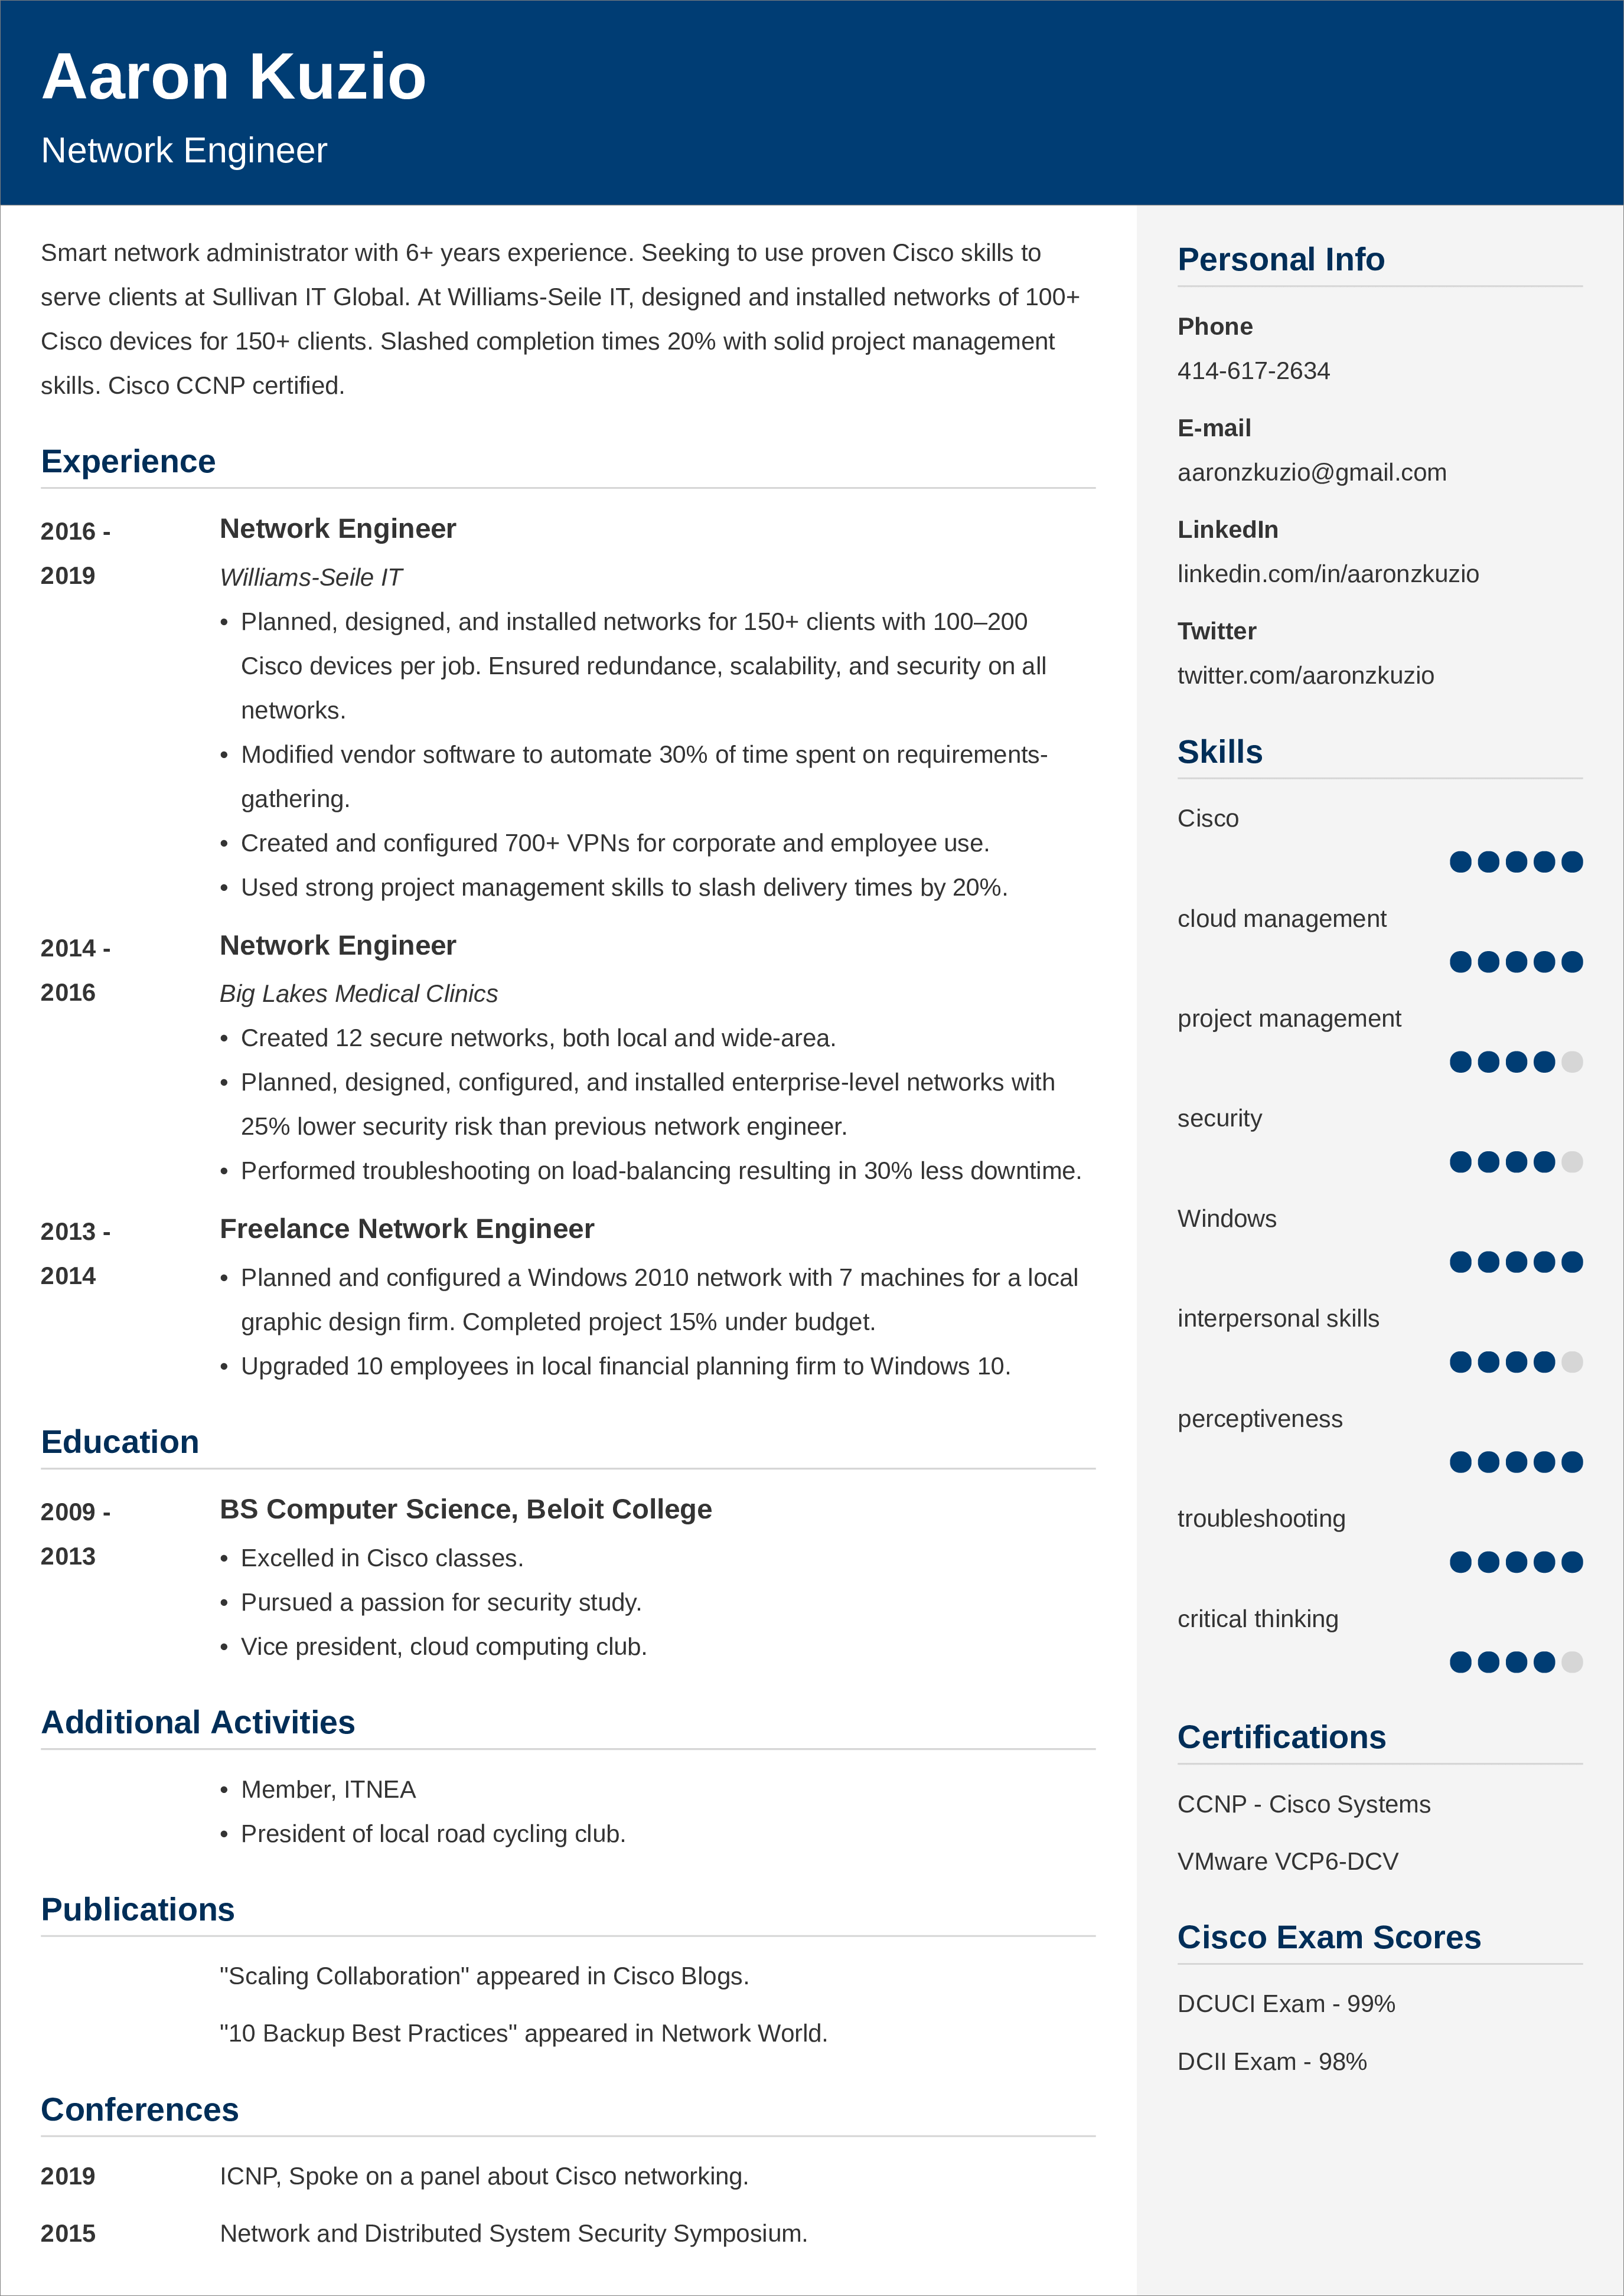 How to List Certifications on a CV (with Samples)